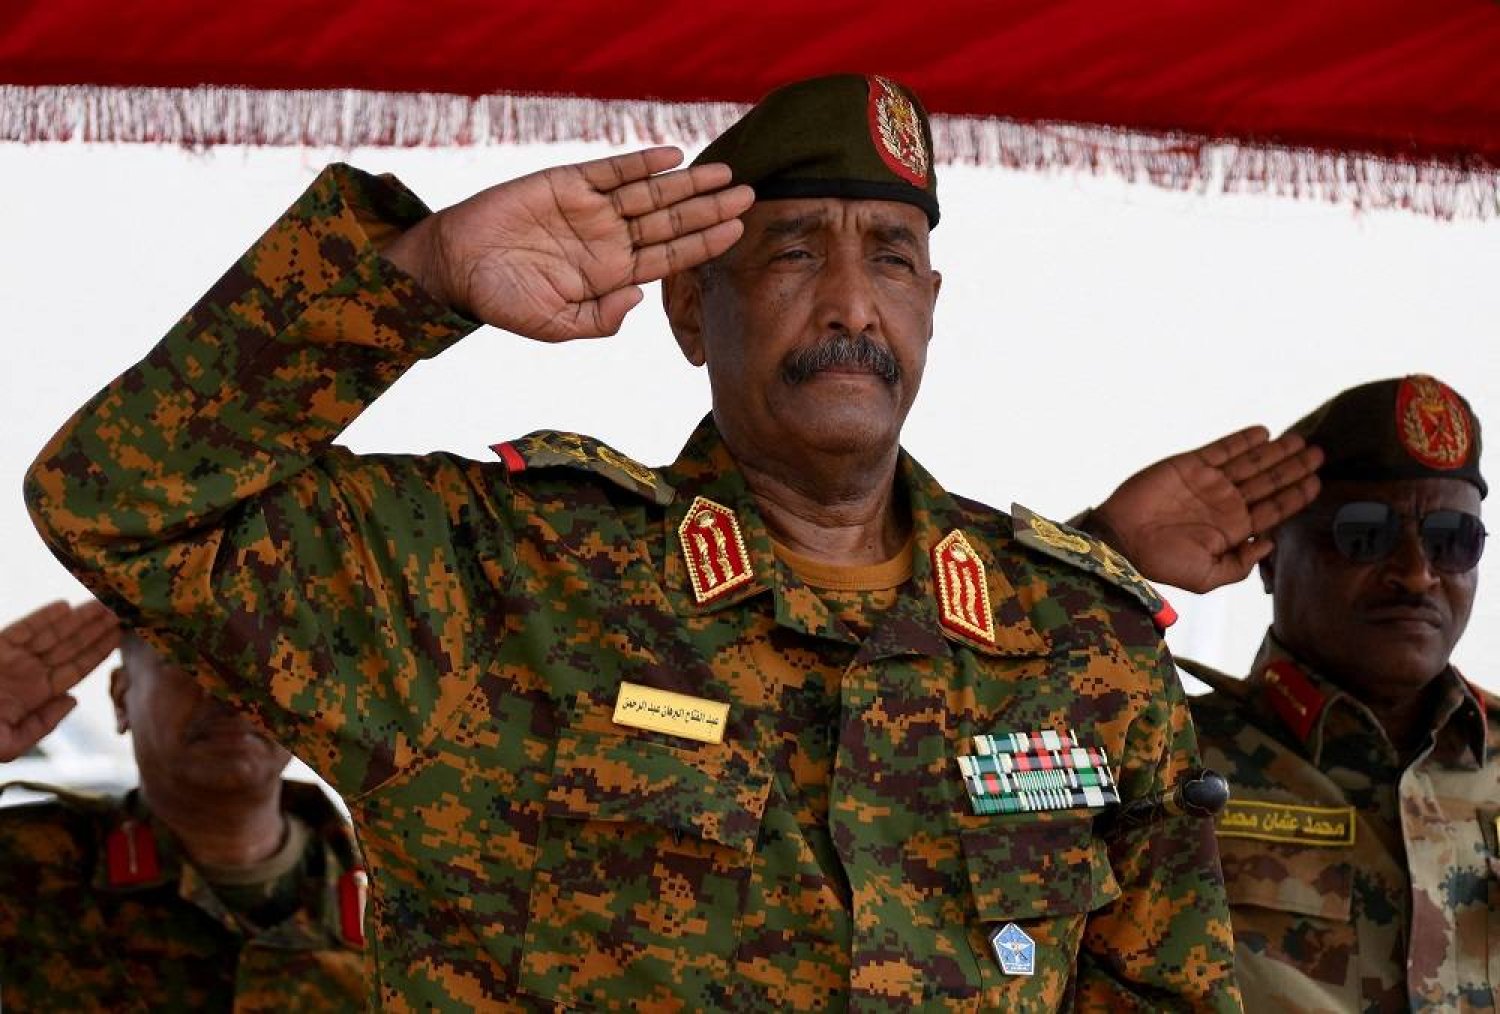 Sudan's General Abdel Fattah al-Burhan salutes as he listens to the national anthem after landing in the military airport of Port Sudan on his first trip away following the crisis in Sudan's capital Khartoum since an internal conflict broke out, in the city of Port Sudan, Sudan, August 27, 2023. (Reuters)